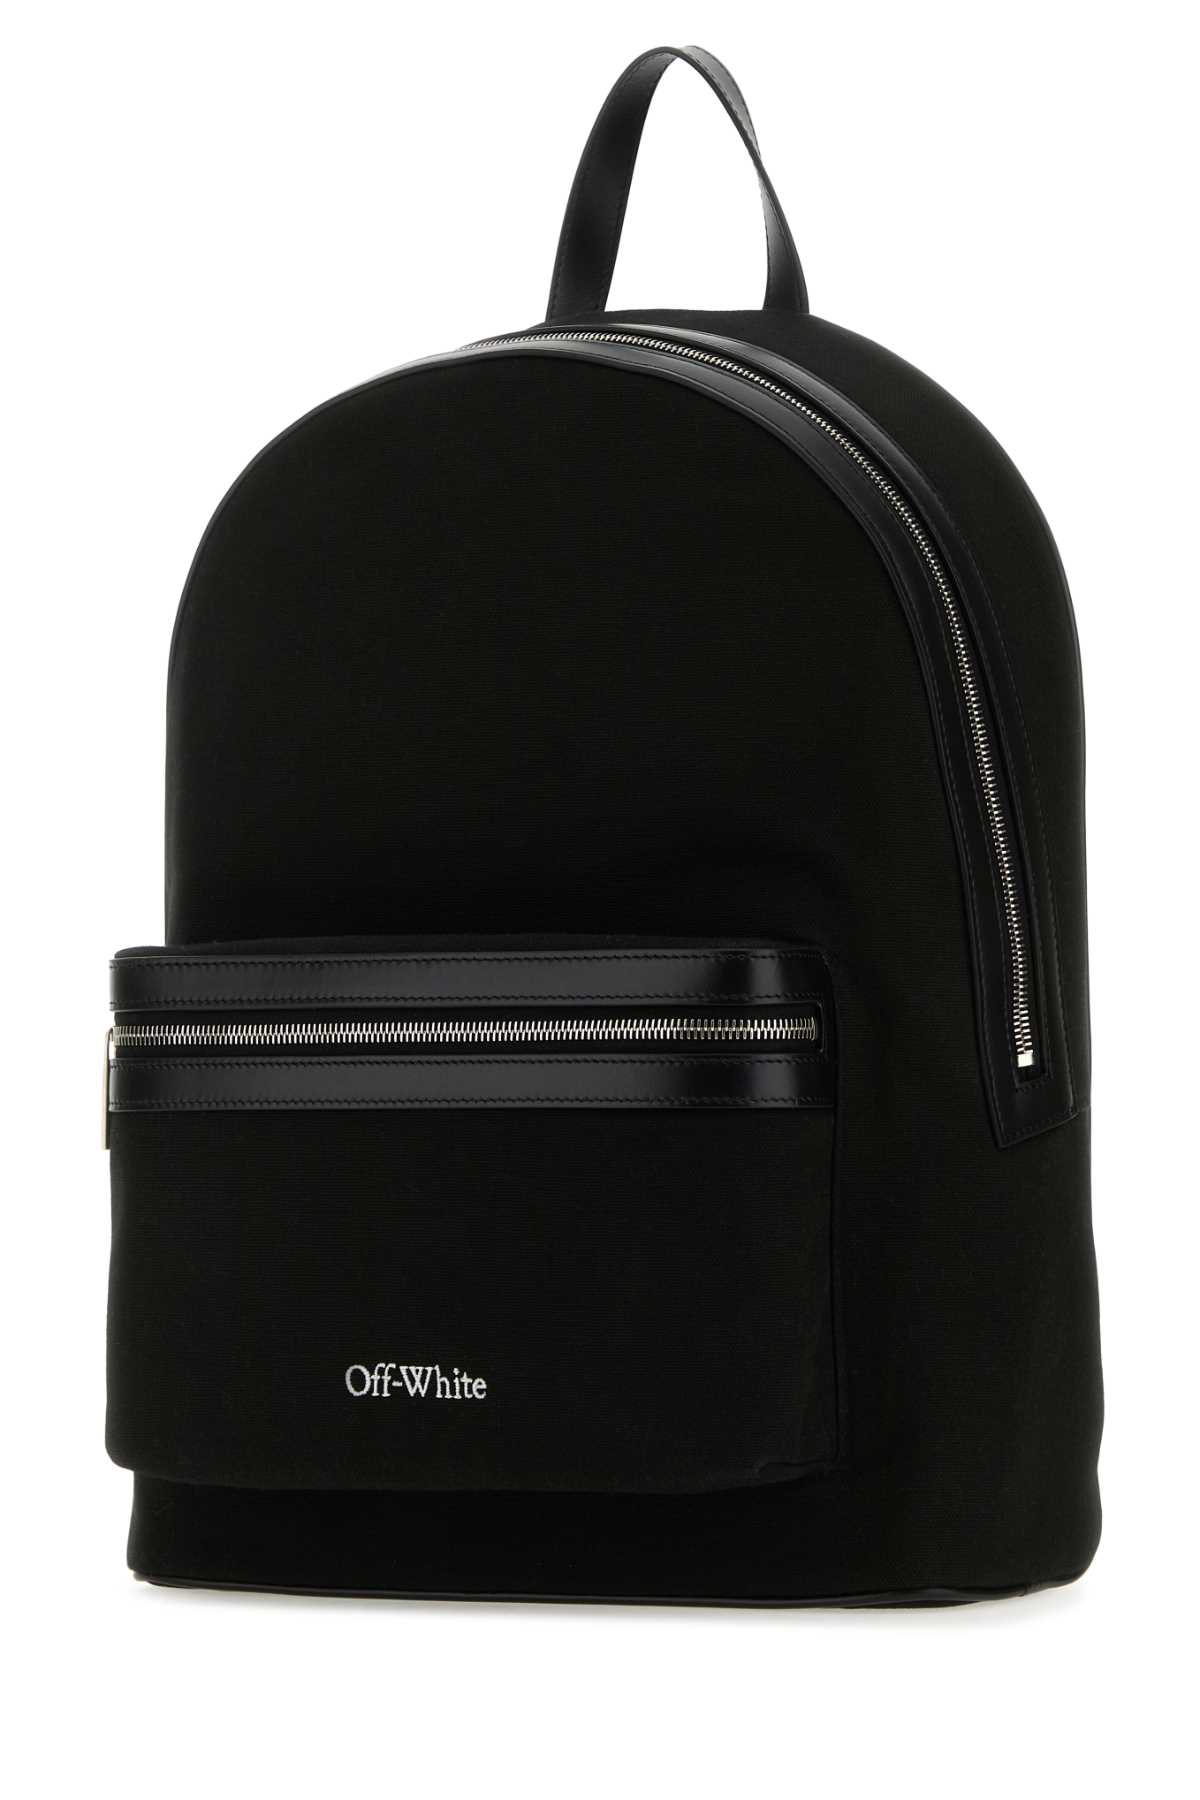 OFF-WHITE BLACK CANVAS CORE BACKPACK